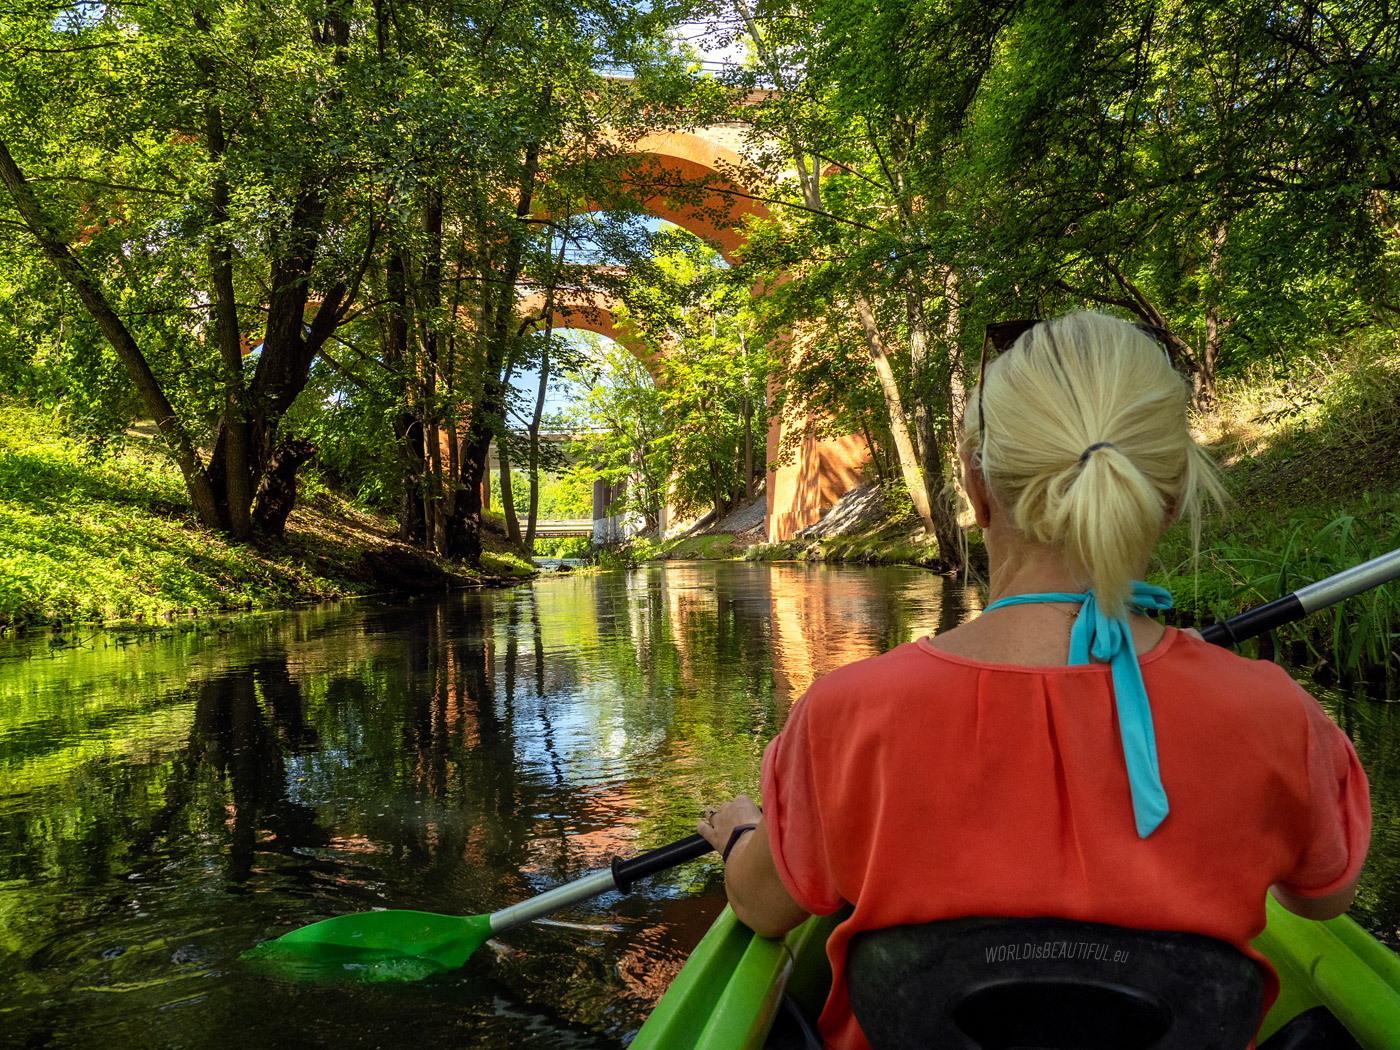 Canoeing the Lyna River